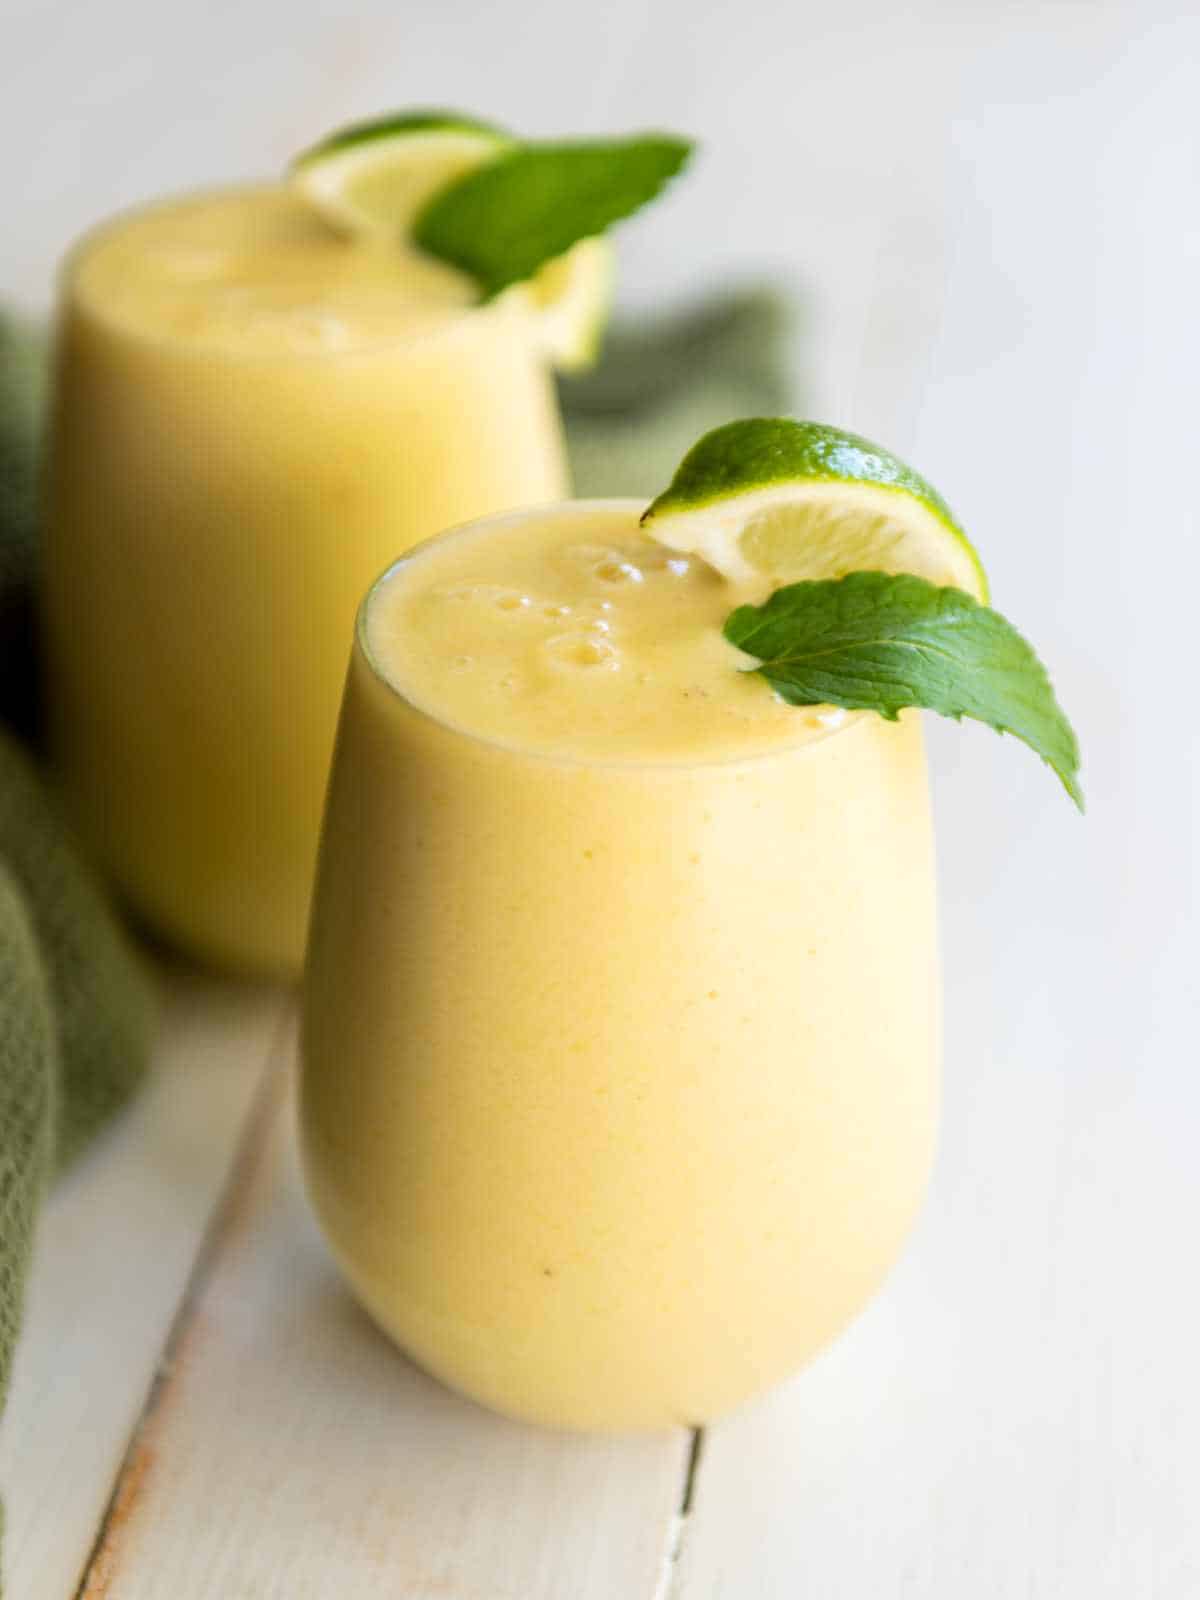 mango pineapple smoothie garnished with lime wedge and mint leaf.